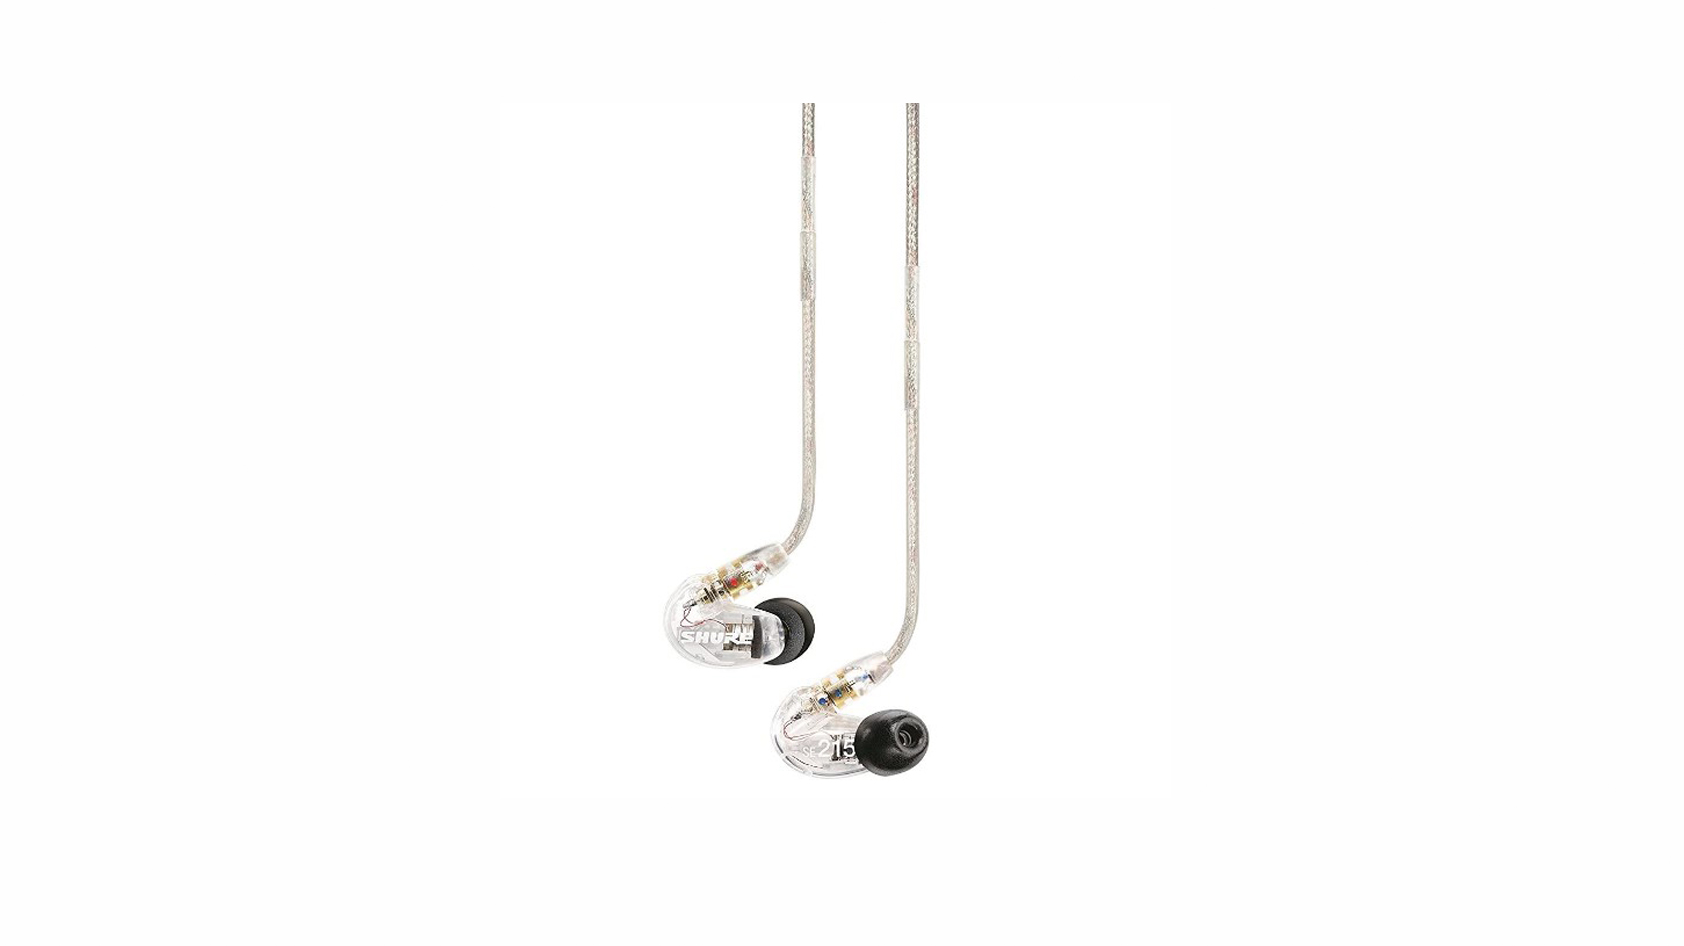 Product shot of the Shure SE215 on a white background.